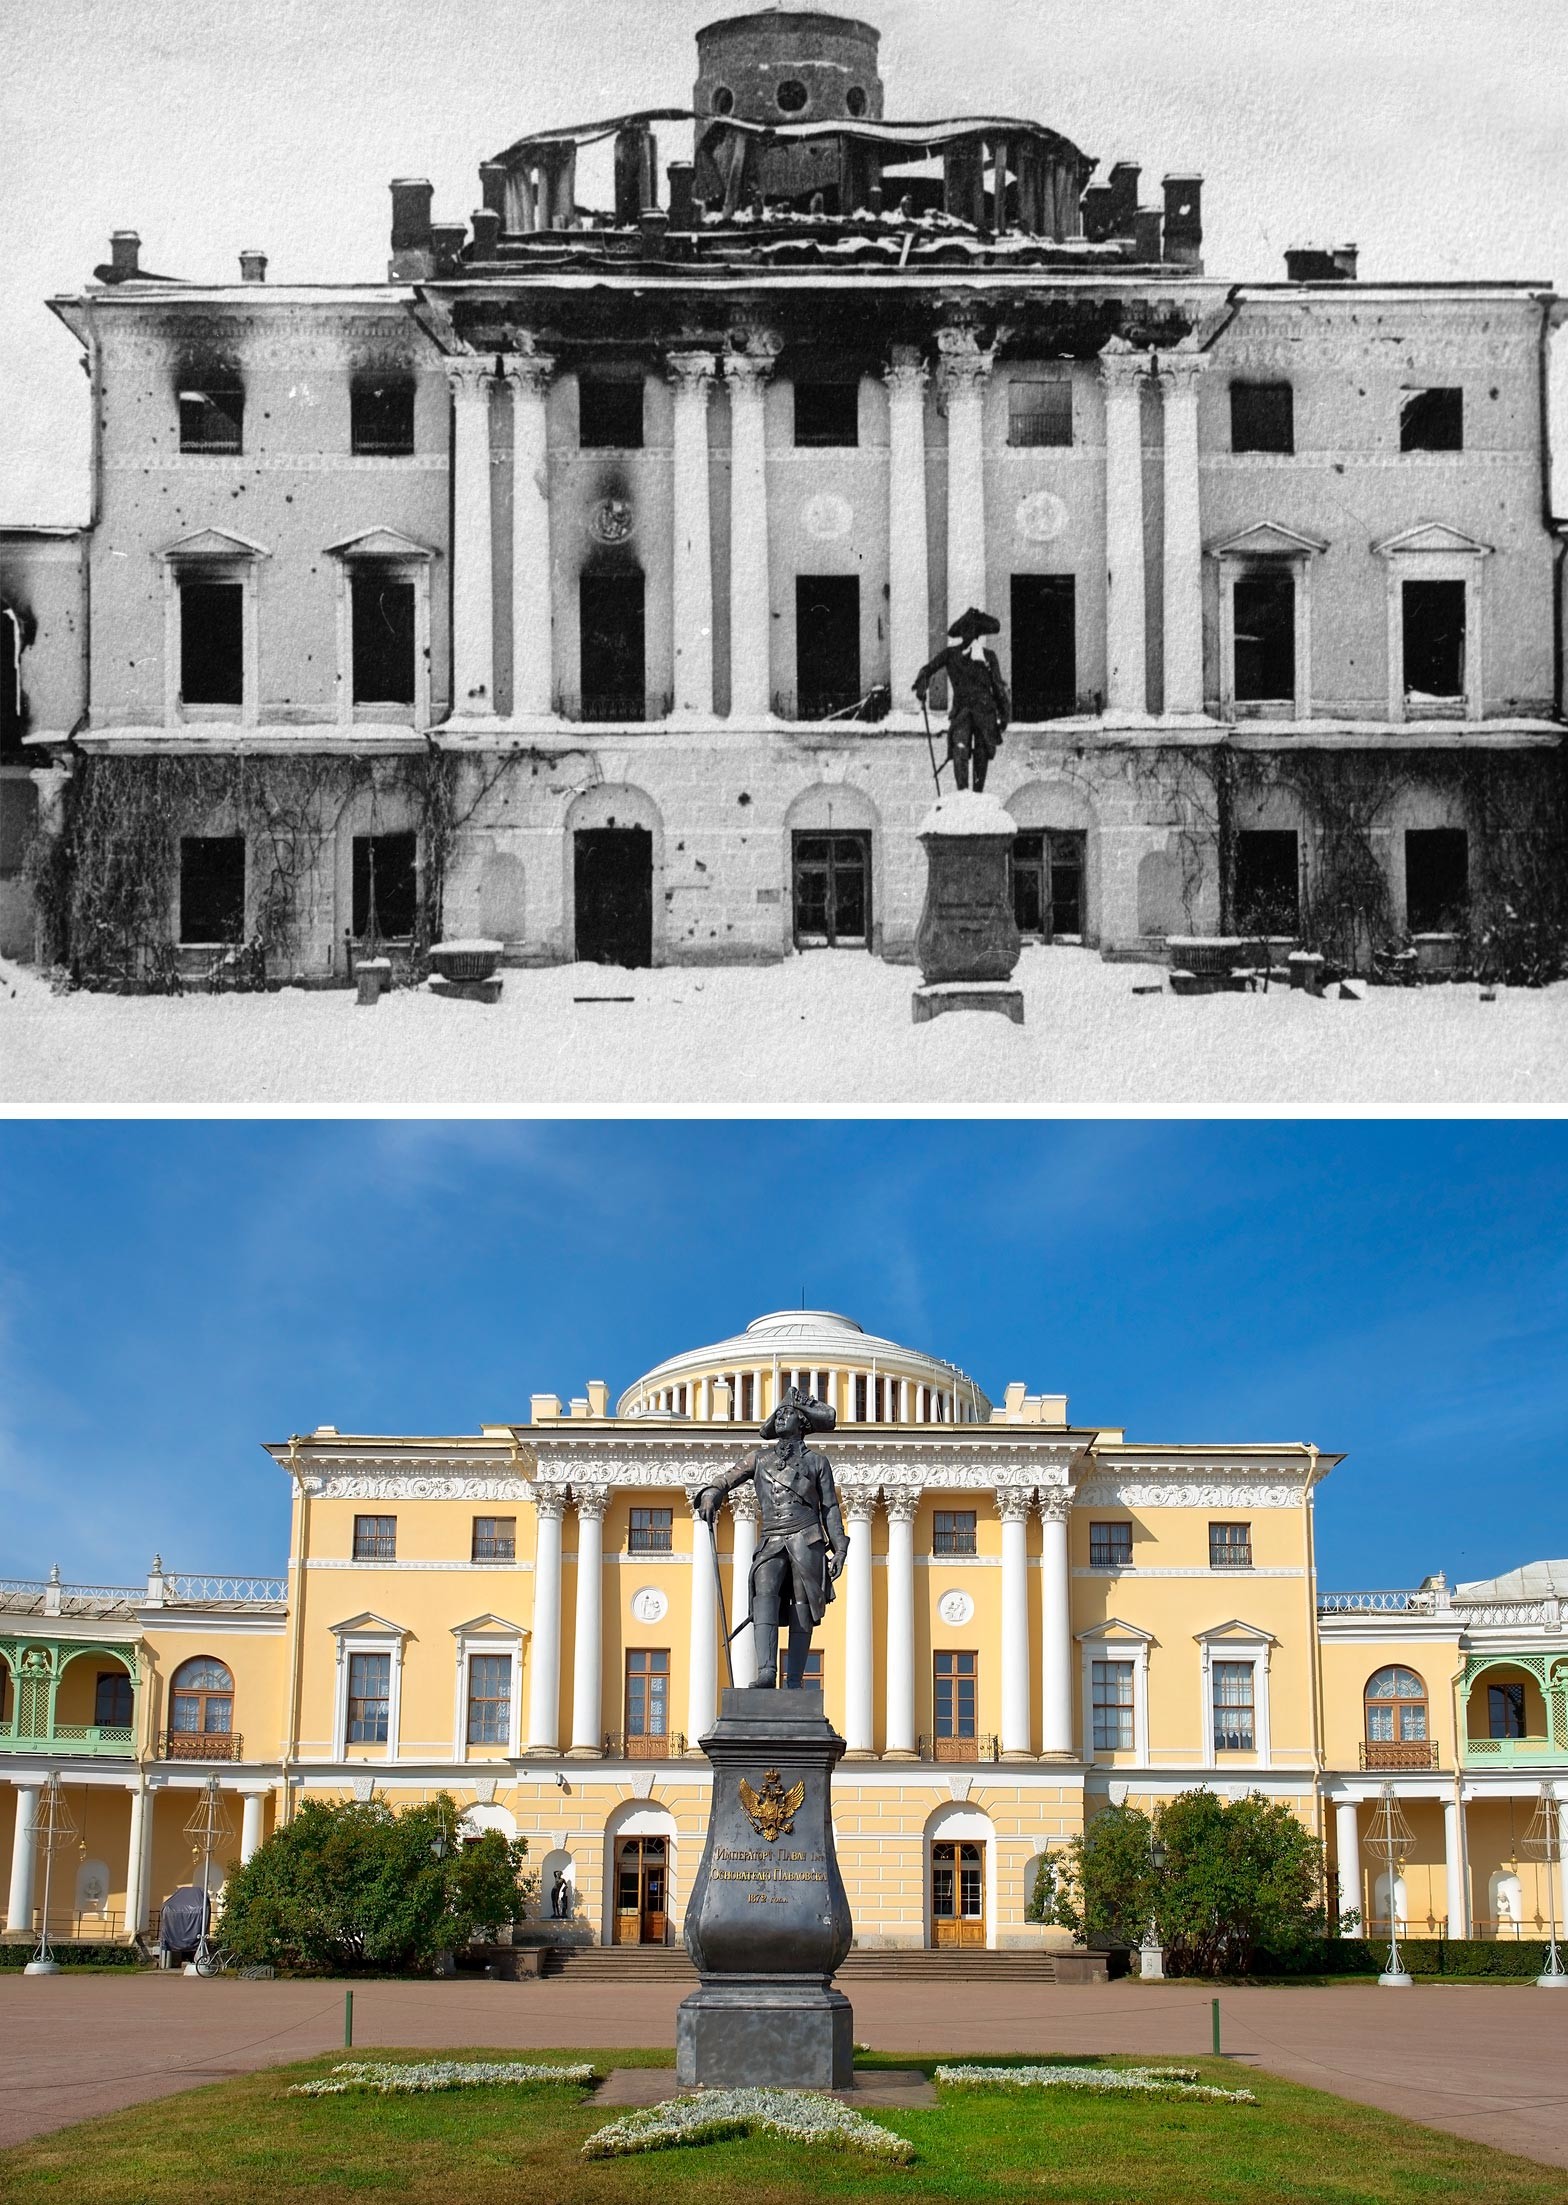 The Pavlovsk Palace in 1944 and now